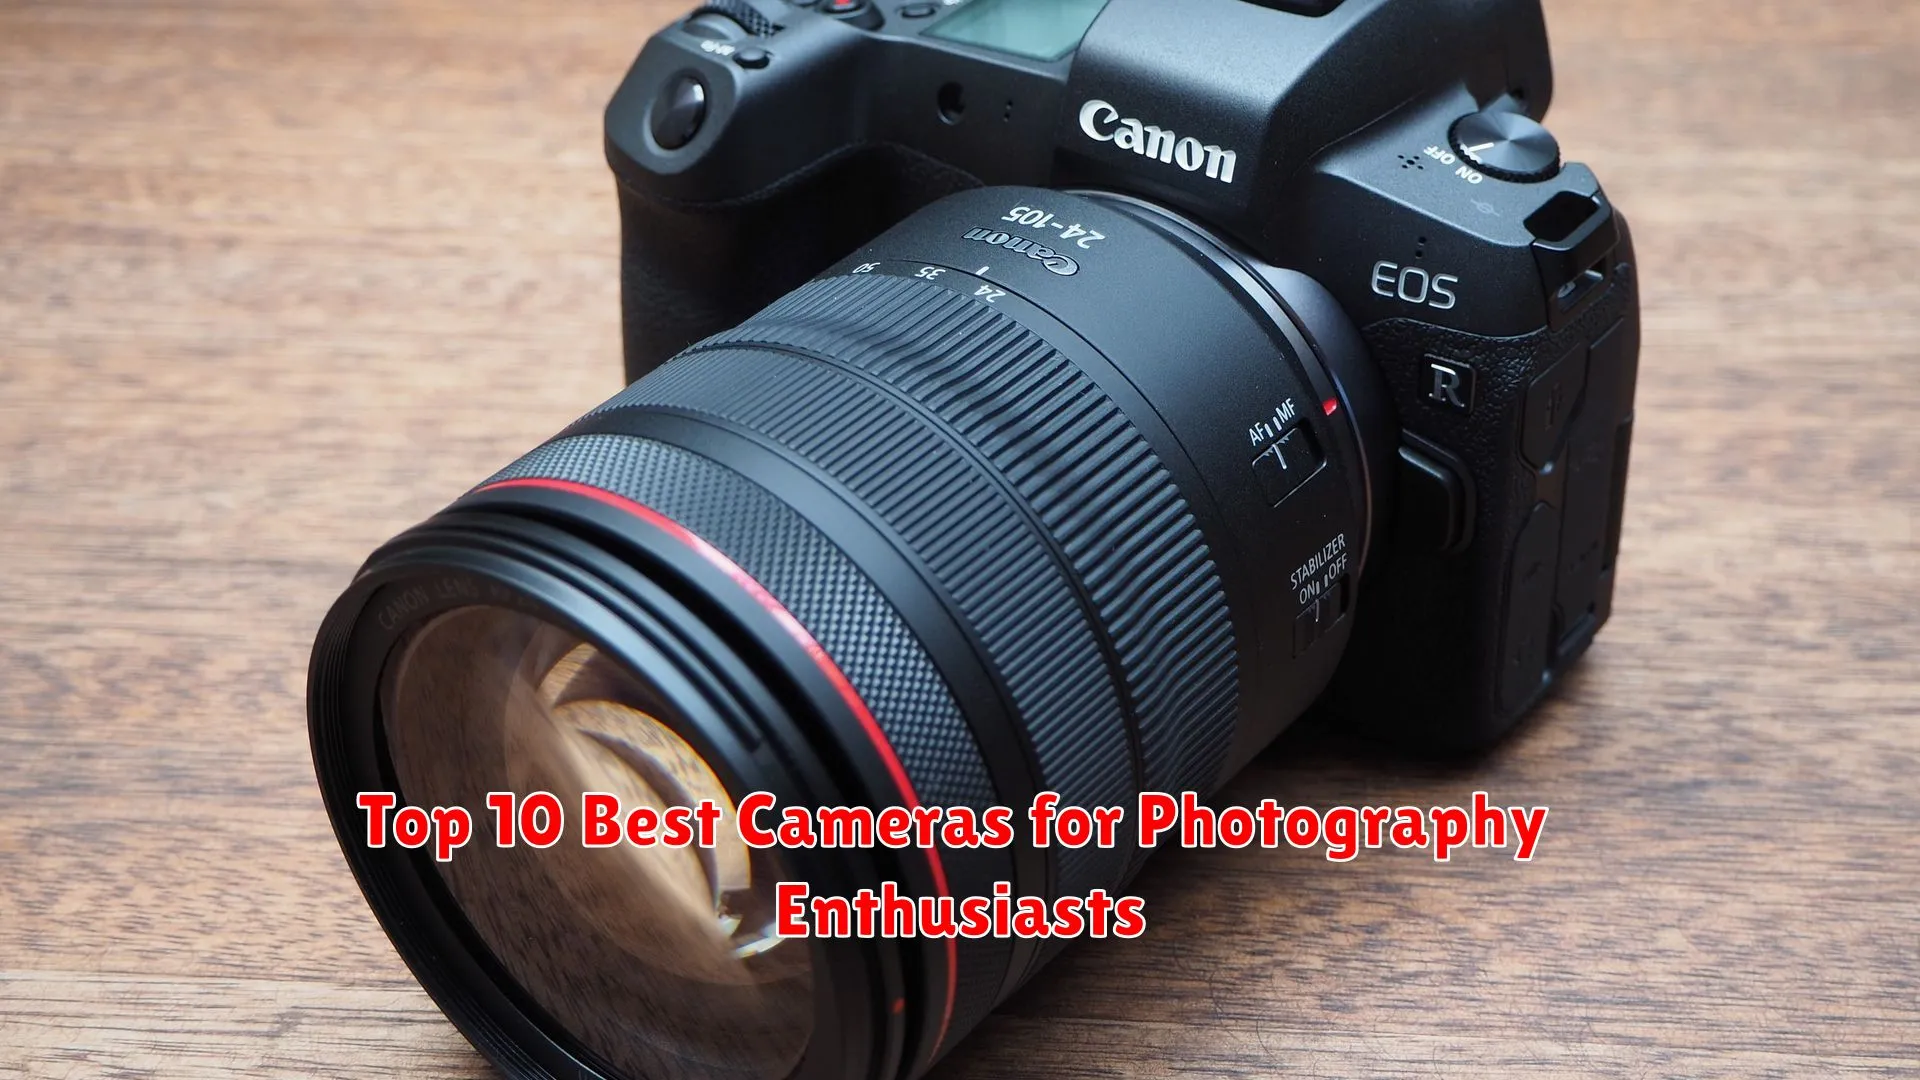 Top 10 Best Cameras for Photography Enthusiasts